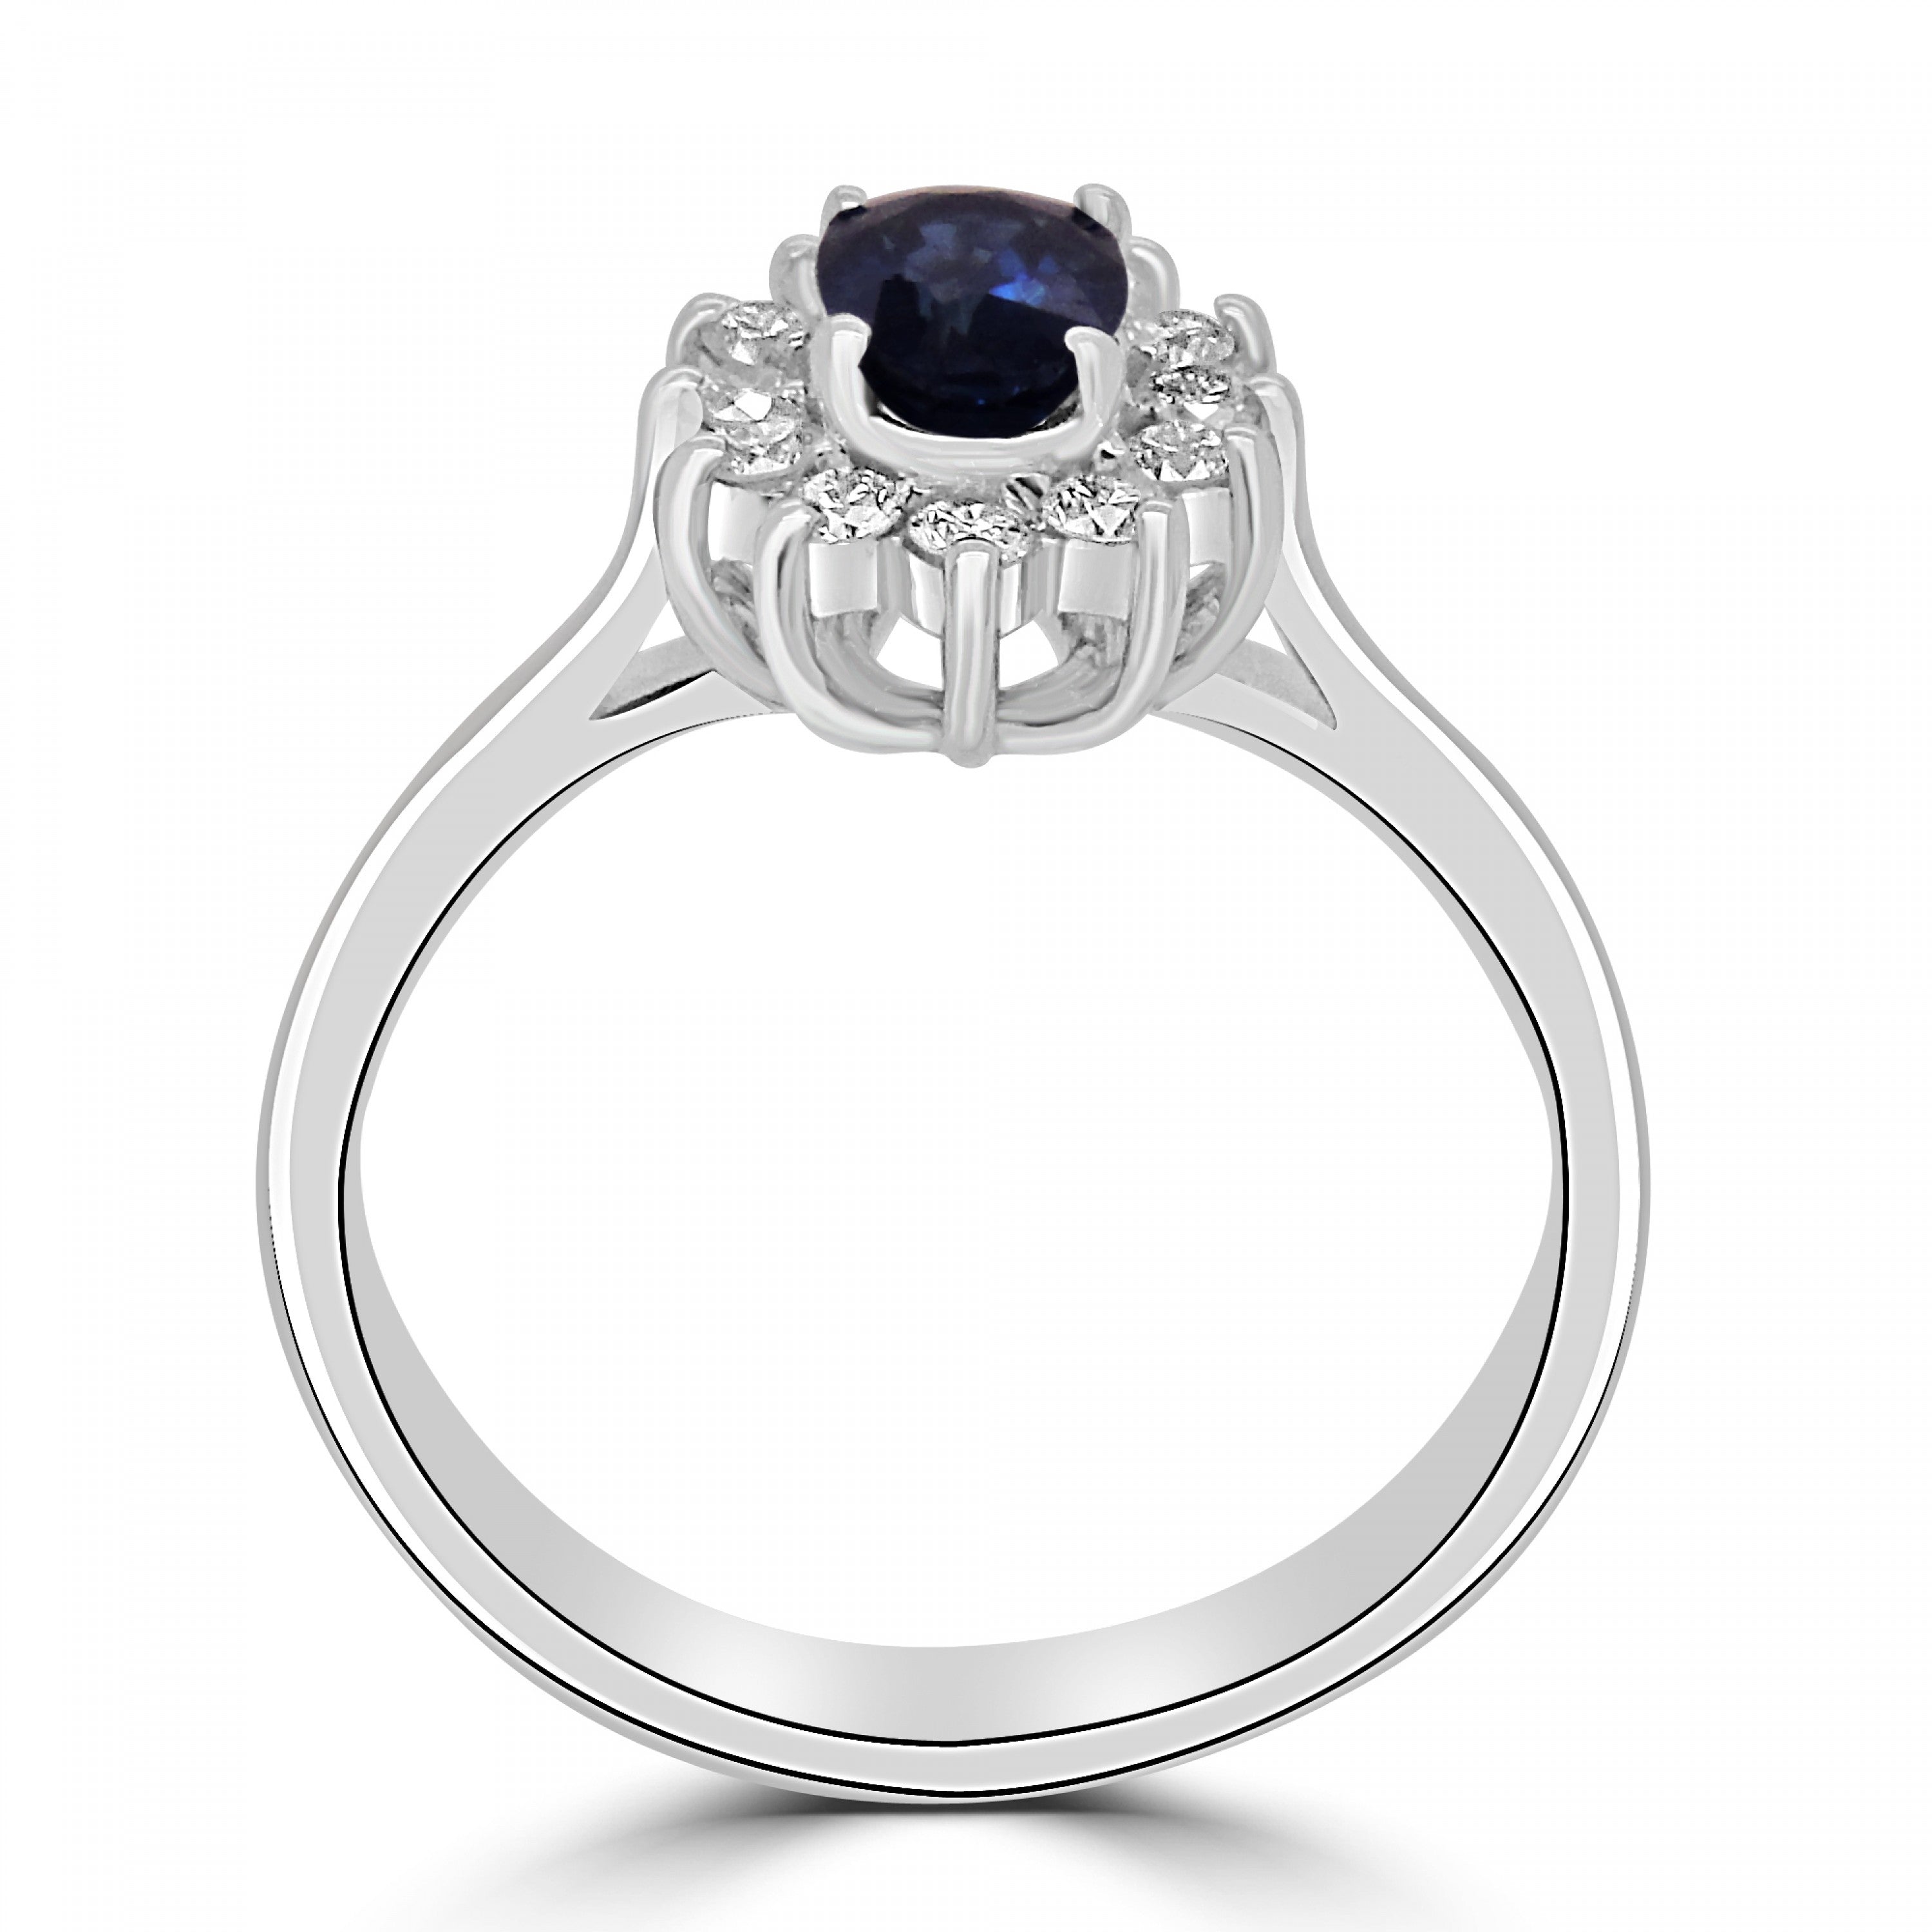 OVAL SAPPHIRE AND DIAMOND CLUSTER ENGAGEMENT RING